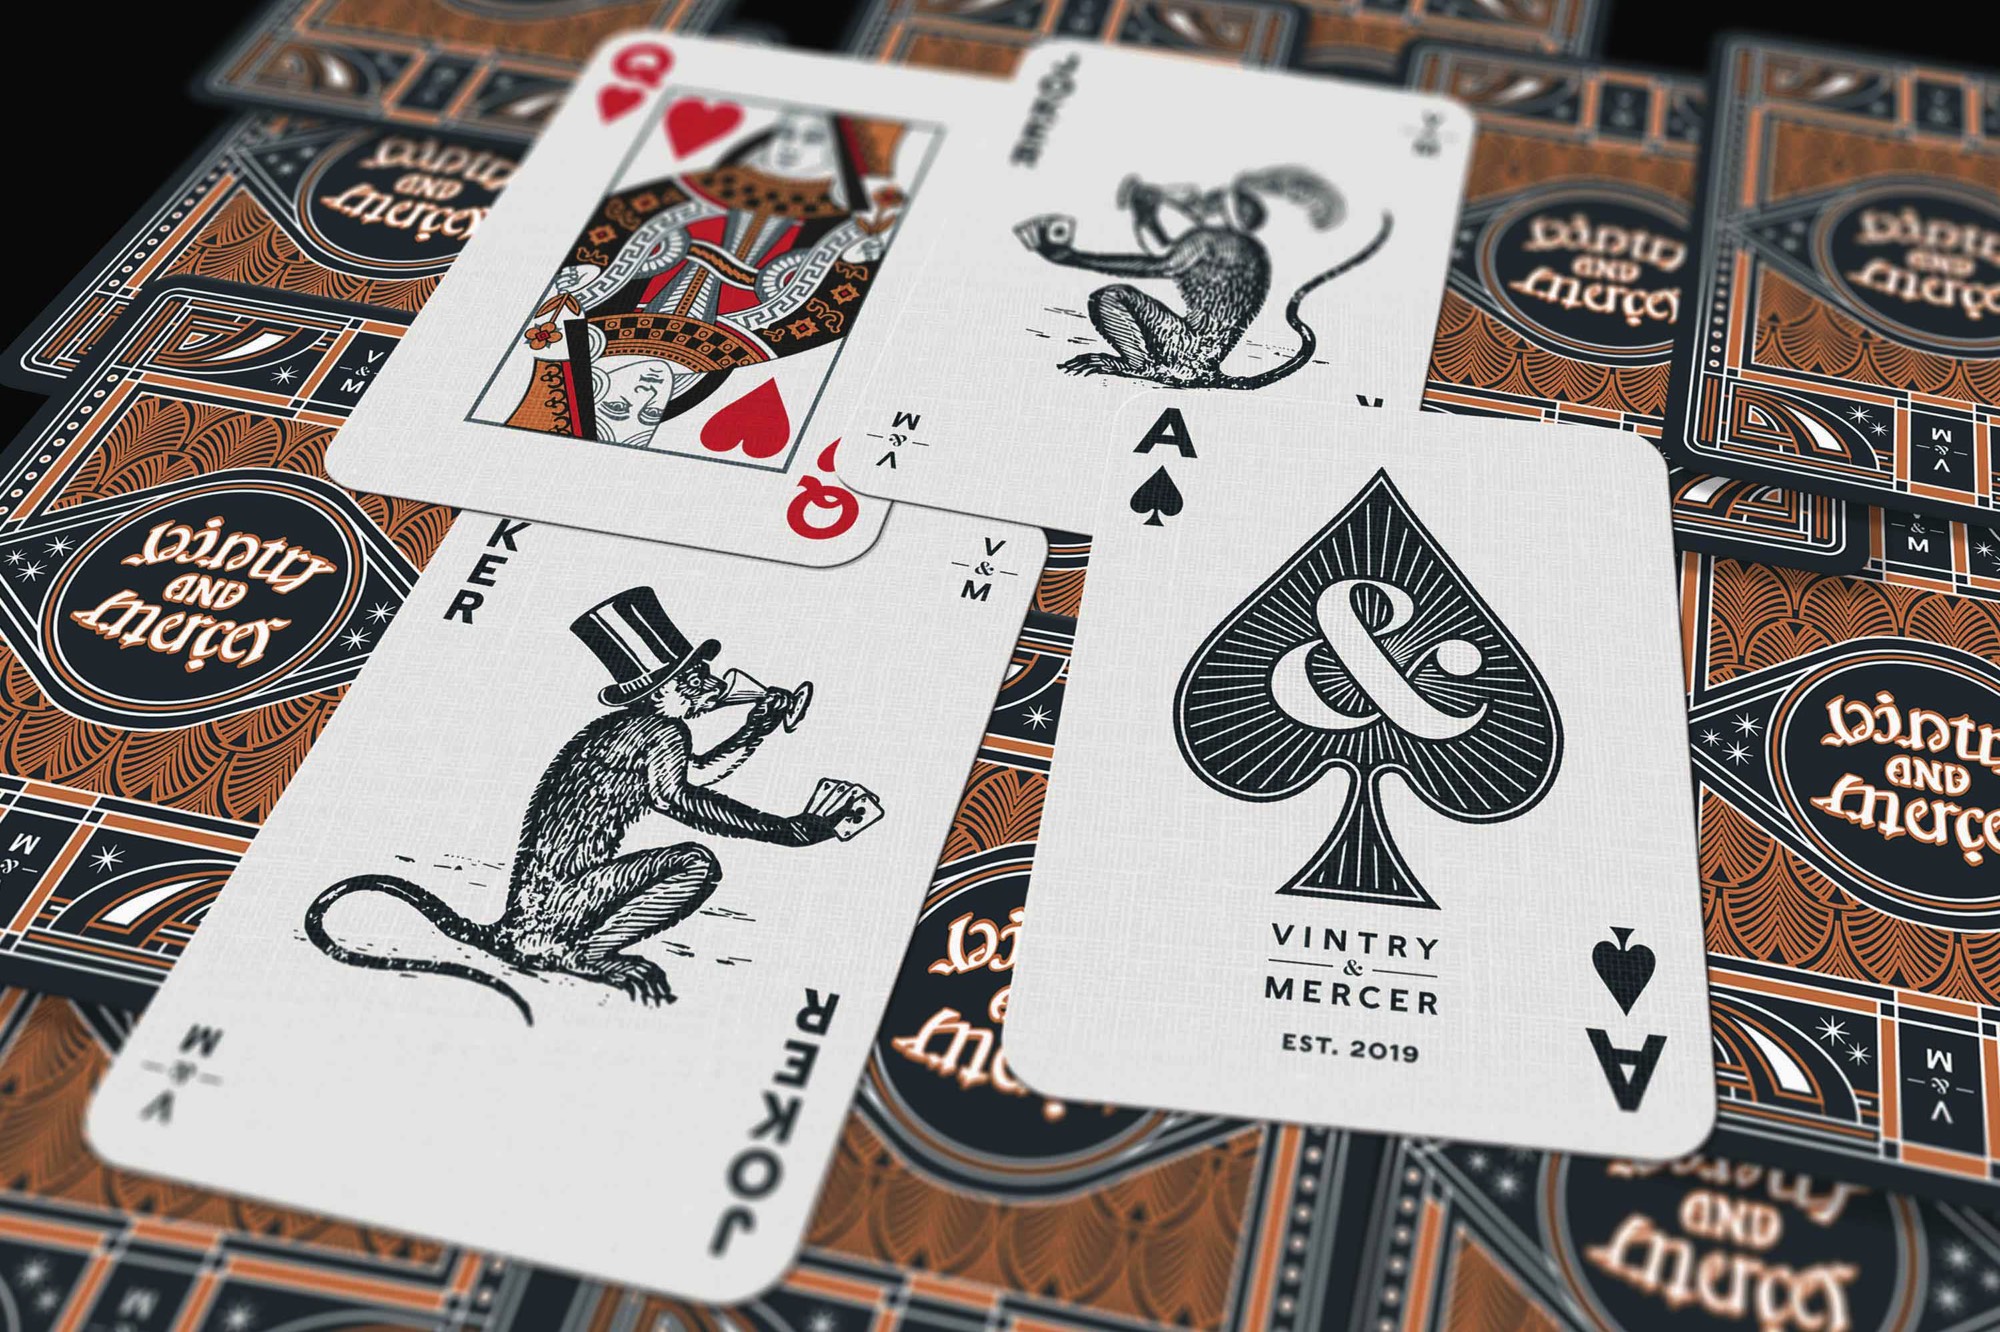 Vintry & Mercer hotel playing cards